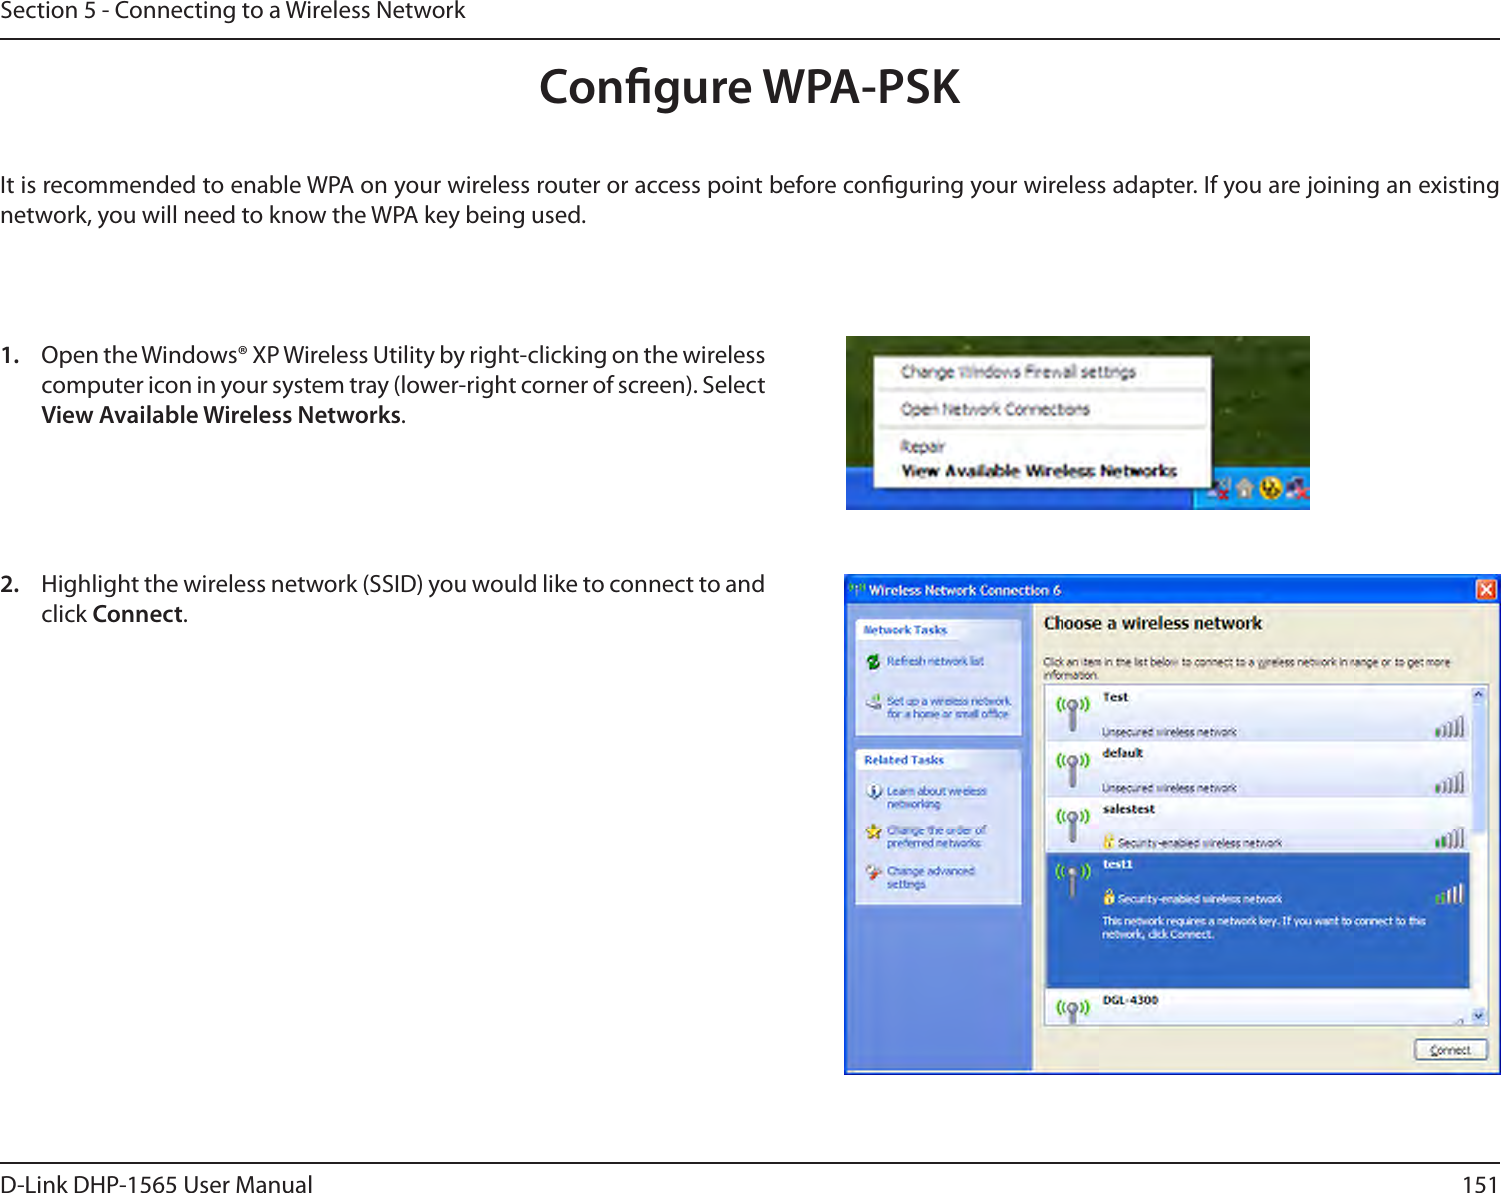 151D-Link DHP-1565 User ManualSection 5 - Connecting to a Wireless NetworkCongure WPA-PSKIt is recommended to enable WPA on your wireless router or access point before conguring your wireless adapter. If you are joining an existing network, you will need to know the WPA key being used.2.  Highlight the wireless network (SSID) you would like to connect to and click Connect.1.  Open the Windows® XP Wireless Utility by right-clicking on the wireless computer icon in your system tray (lower-right corner of screen). Select View Available Wireless Networks. 